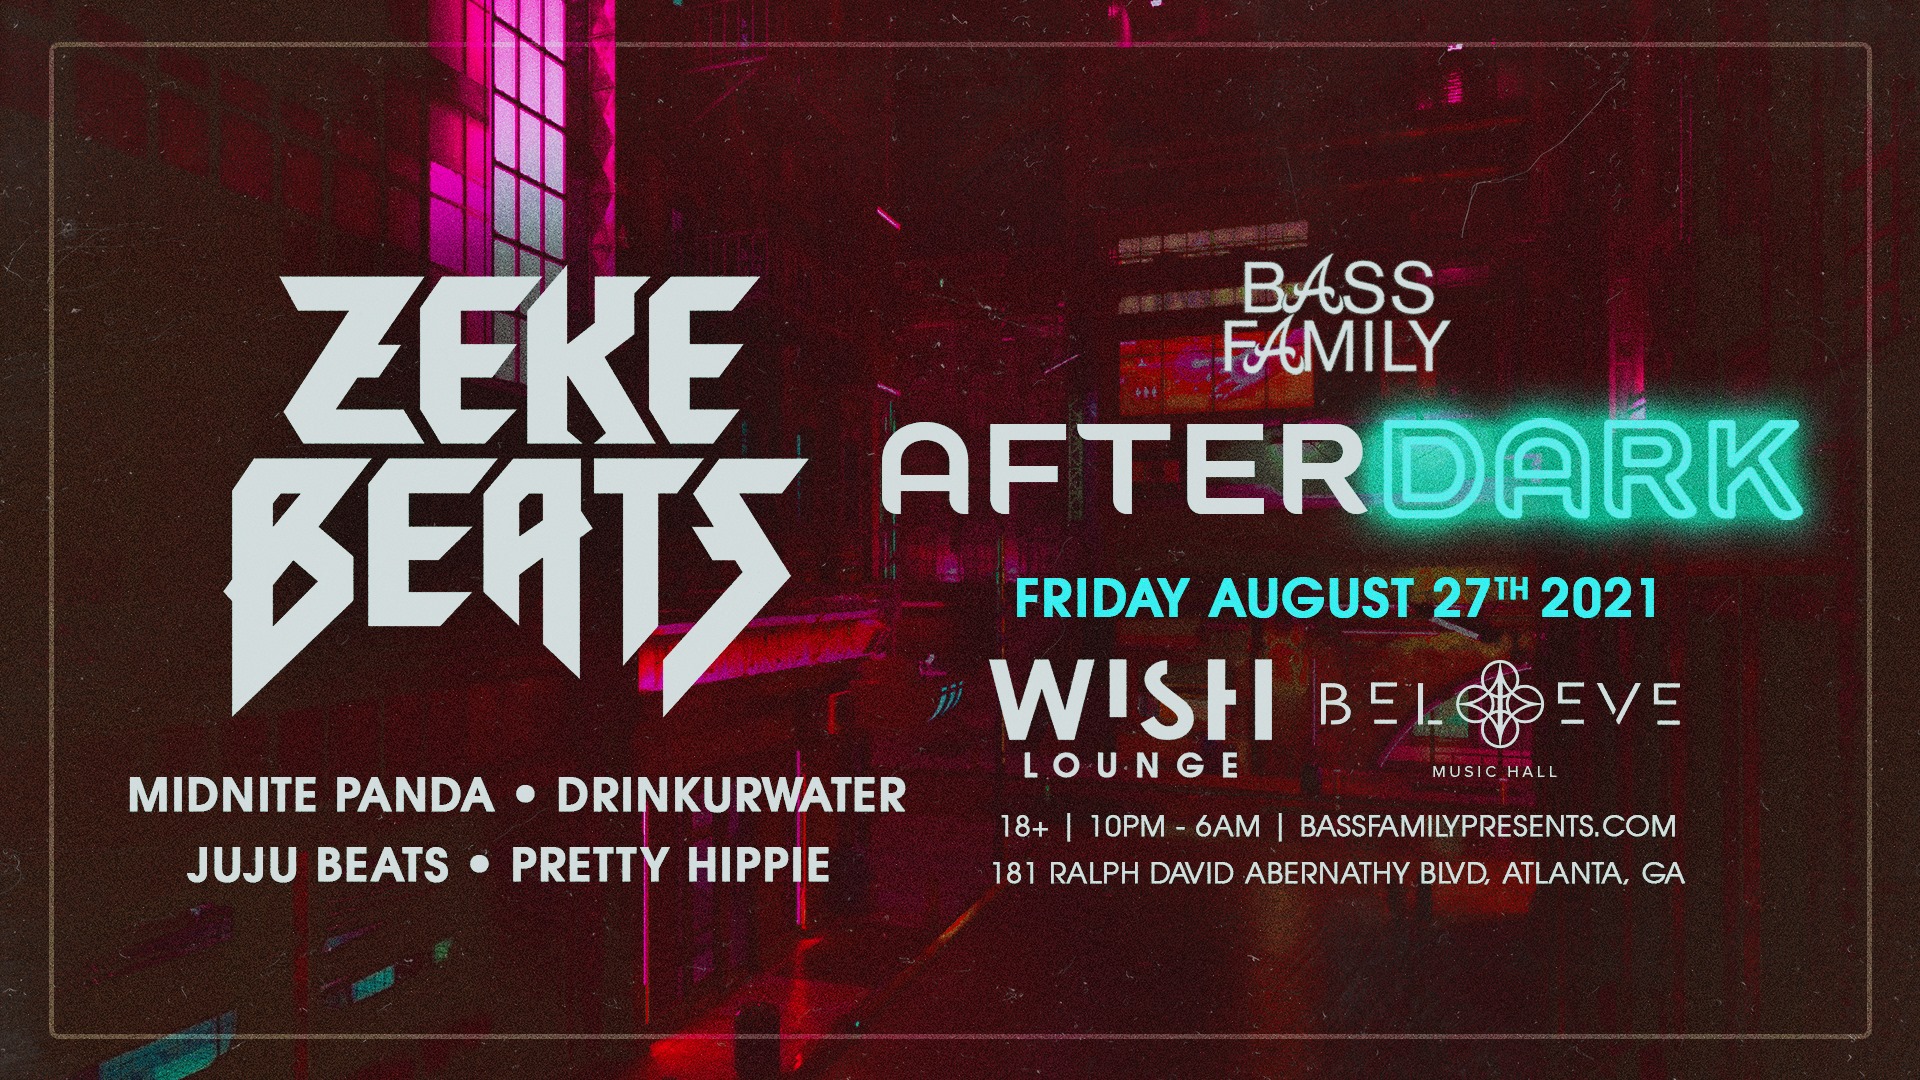 wish lounge believe after dark bass family